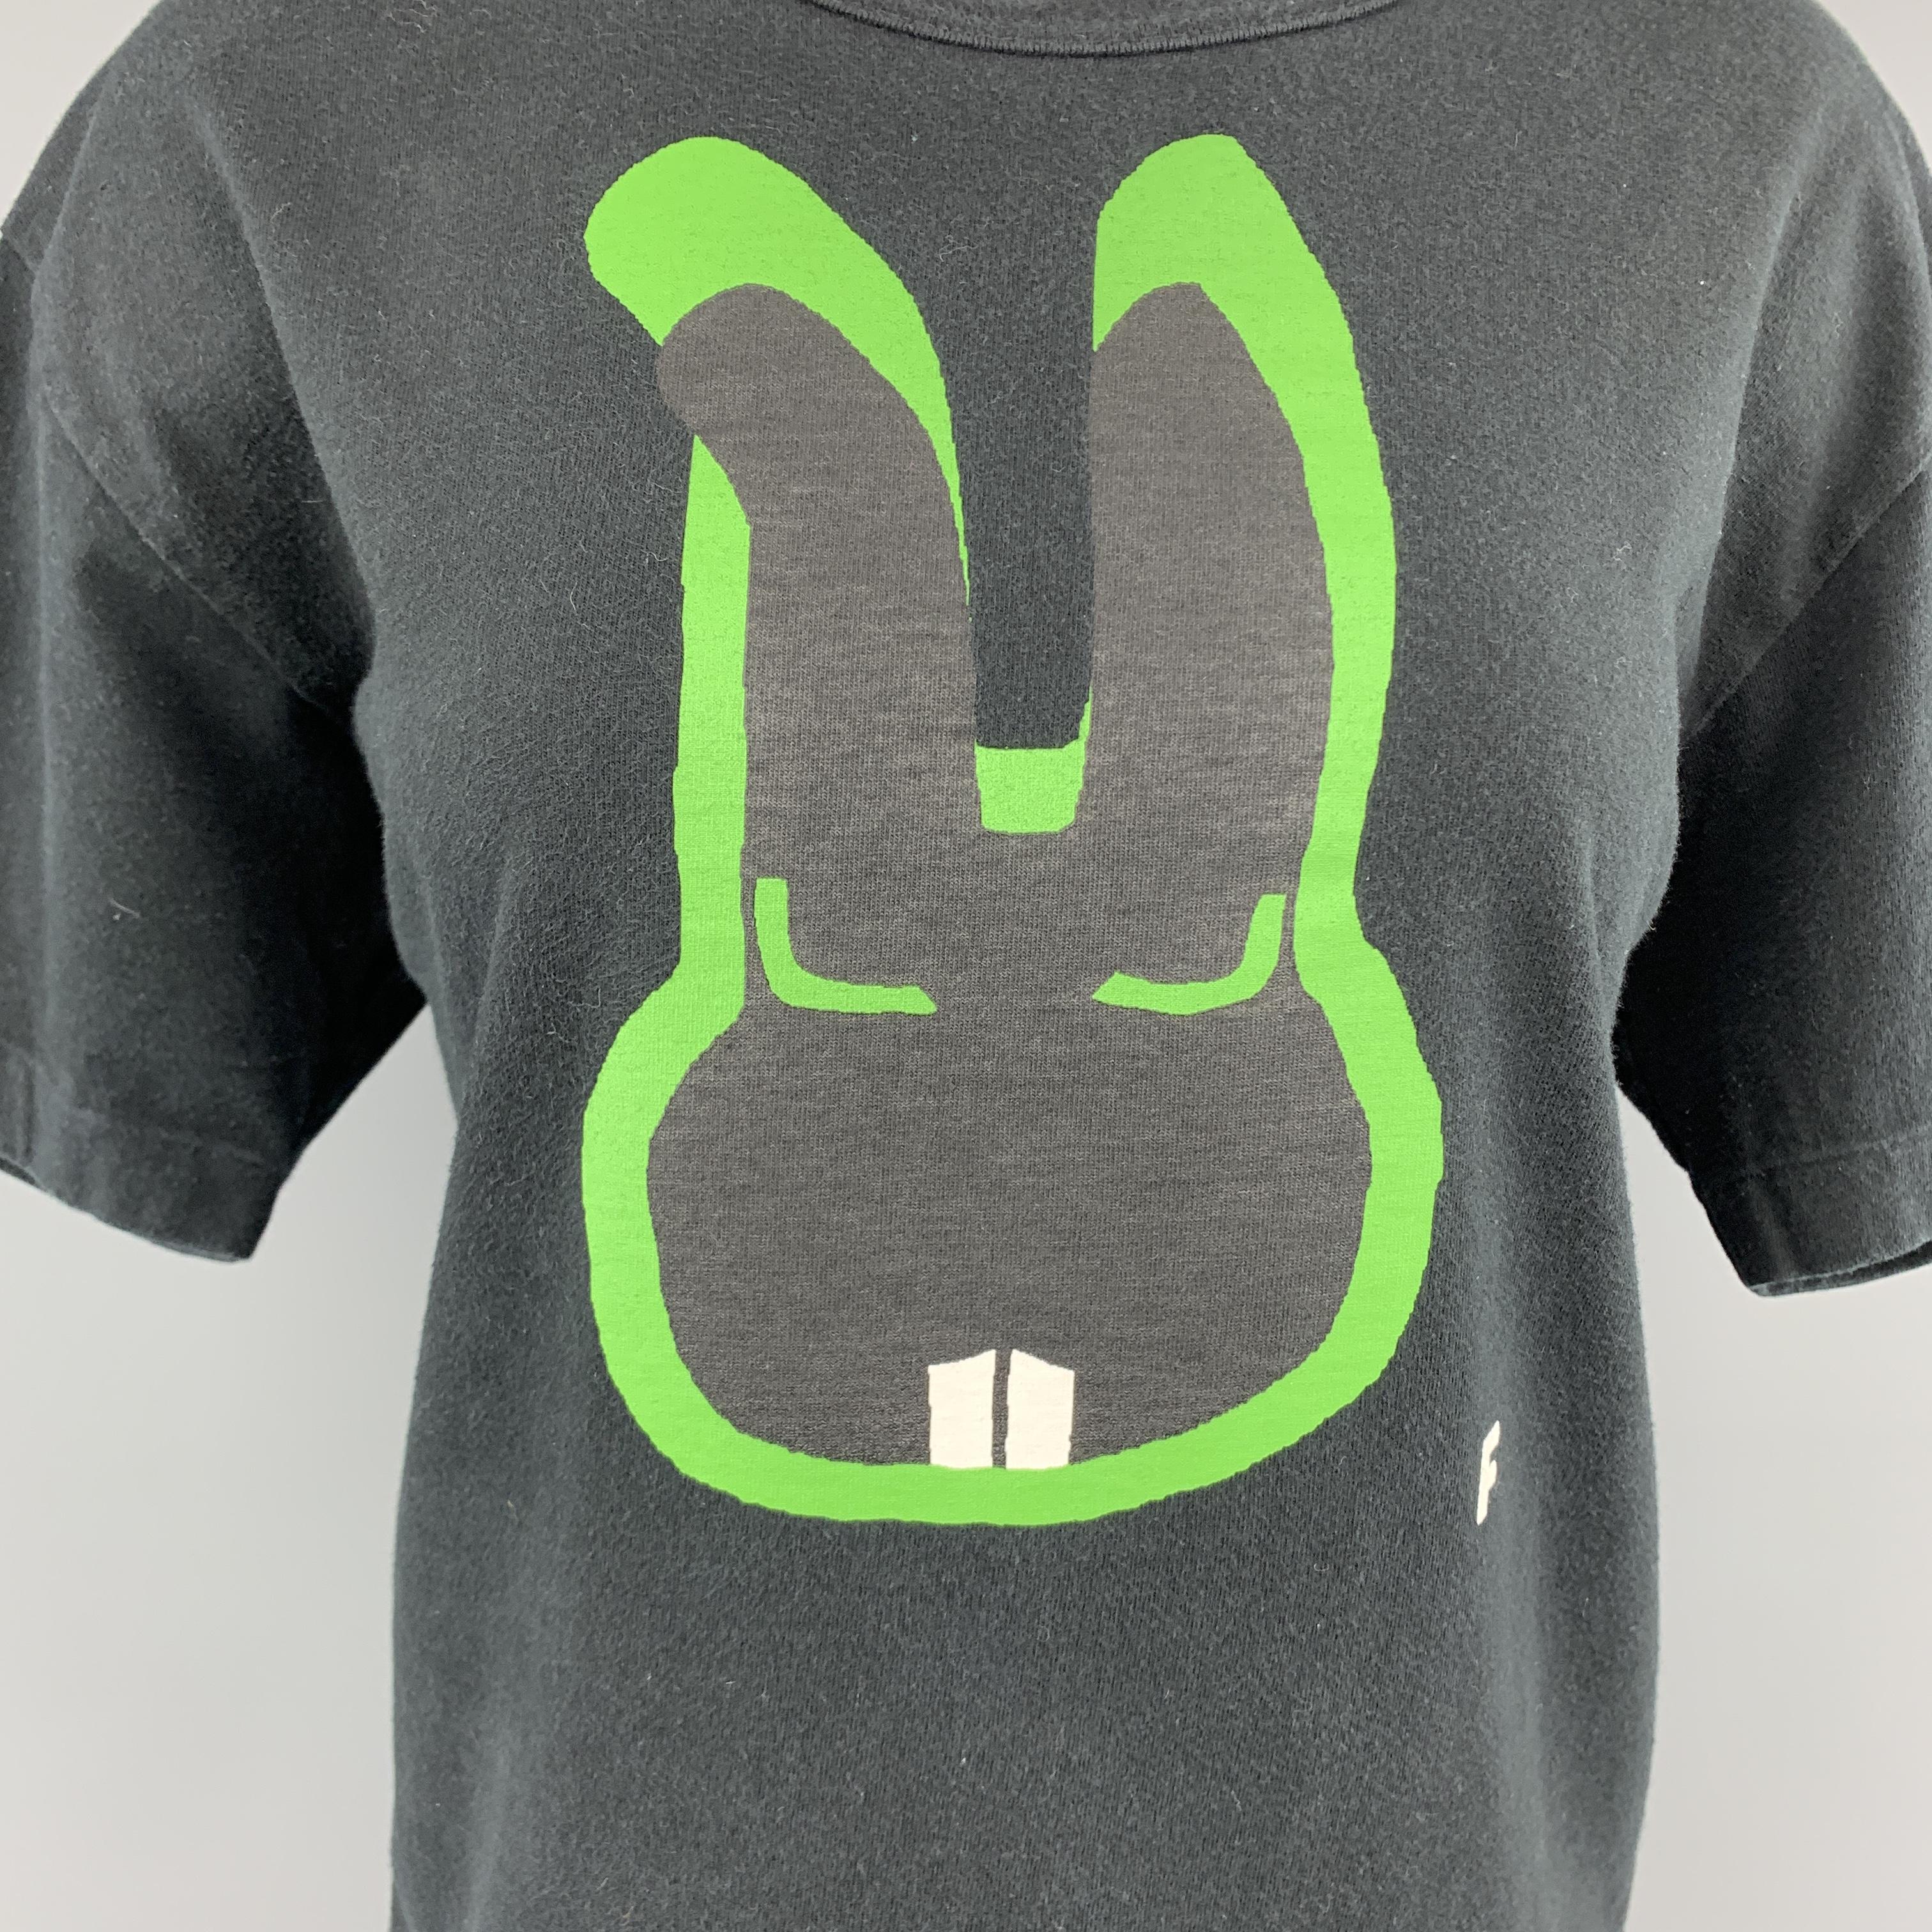 COMME des GARCONS BLACK T-shirt comes in black jersey with a crew neck, short sleeves, and green bunny face F graphic. fading throughout. As-is.
 
Good Pre-Owned Condition.
Marked: XL AD 2012
 
Measurements:
 
Shoulder: 19 in.
Bust: 44 in.
Sleeve: 8